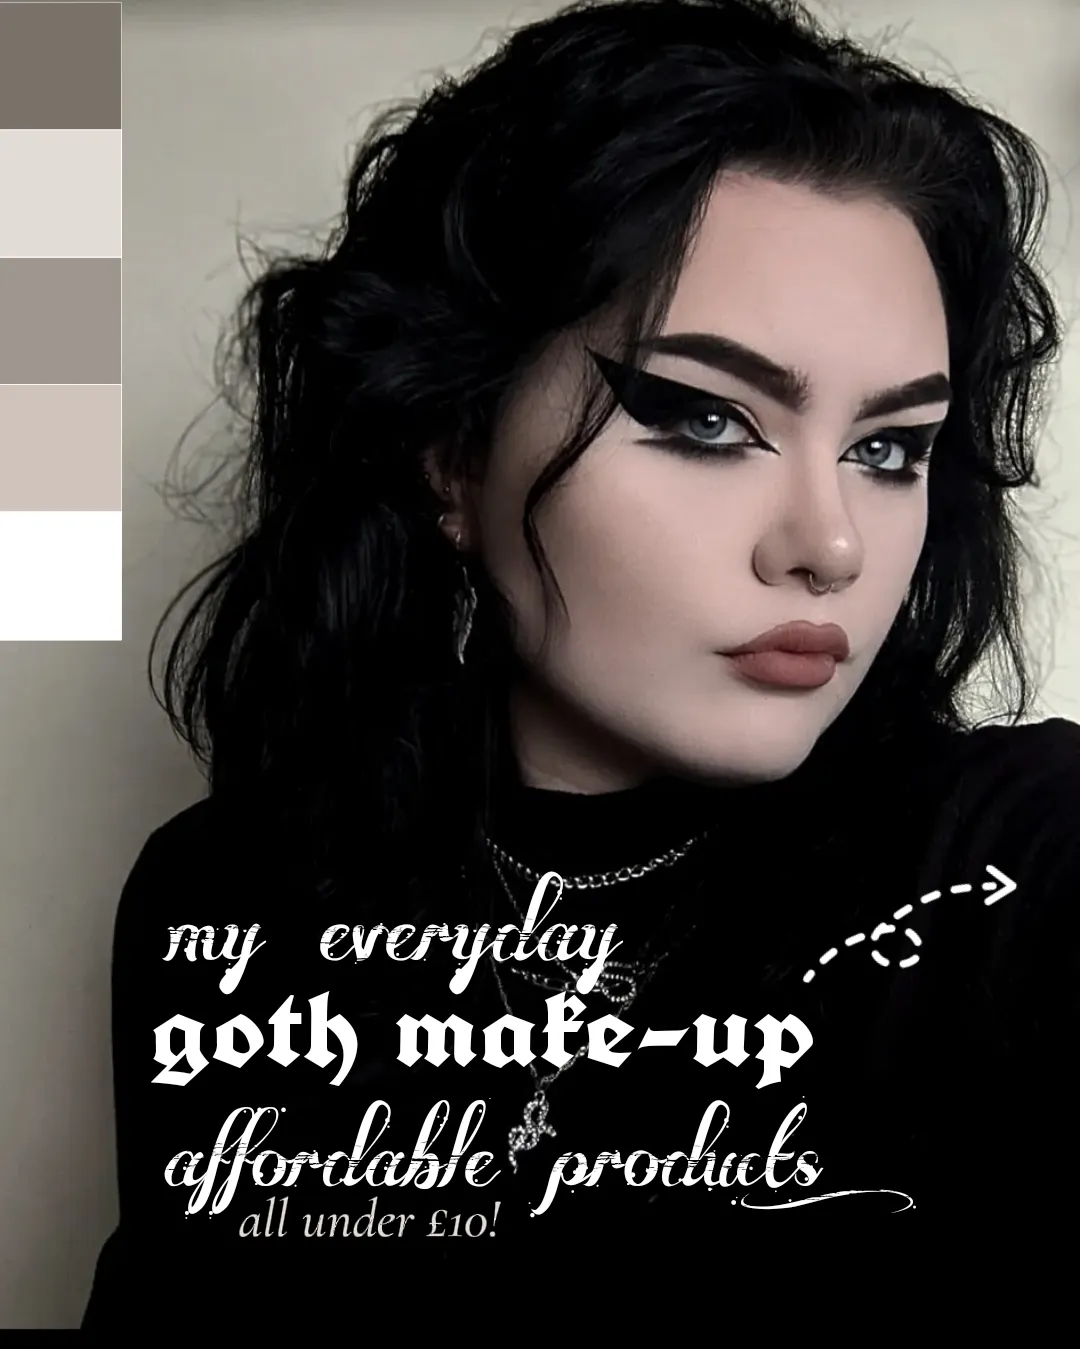 19 Top Goth Makeup For Gl Wearers